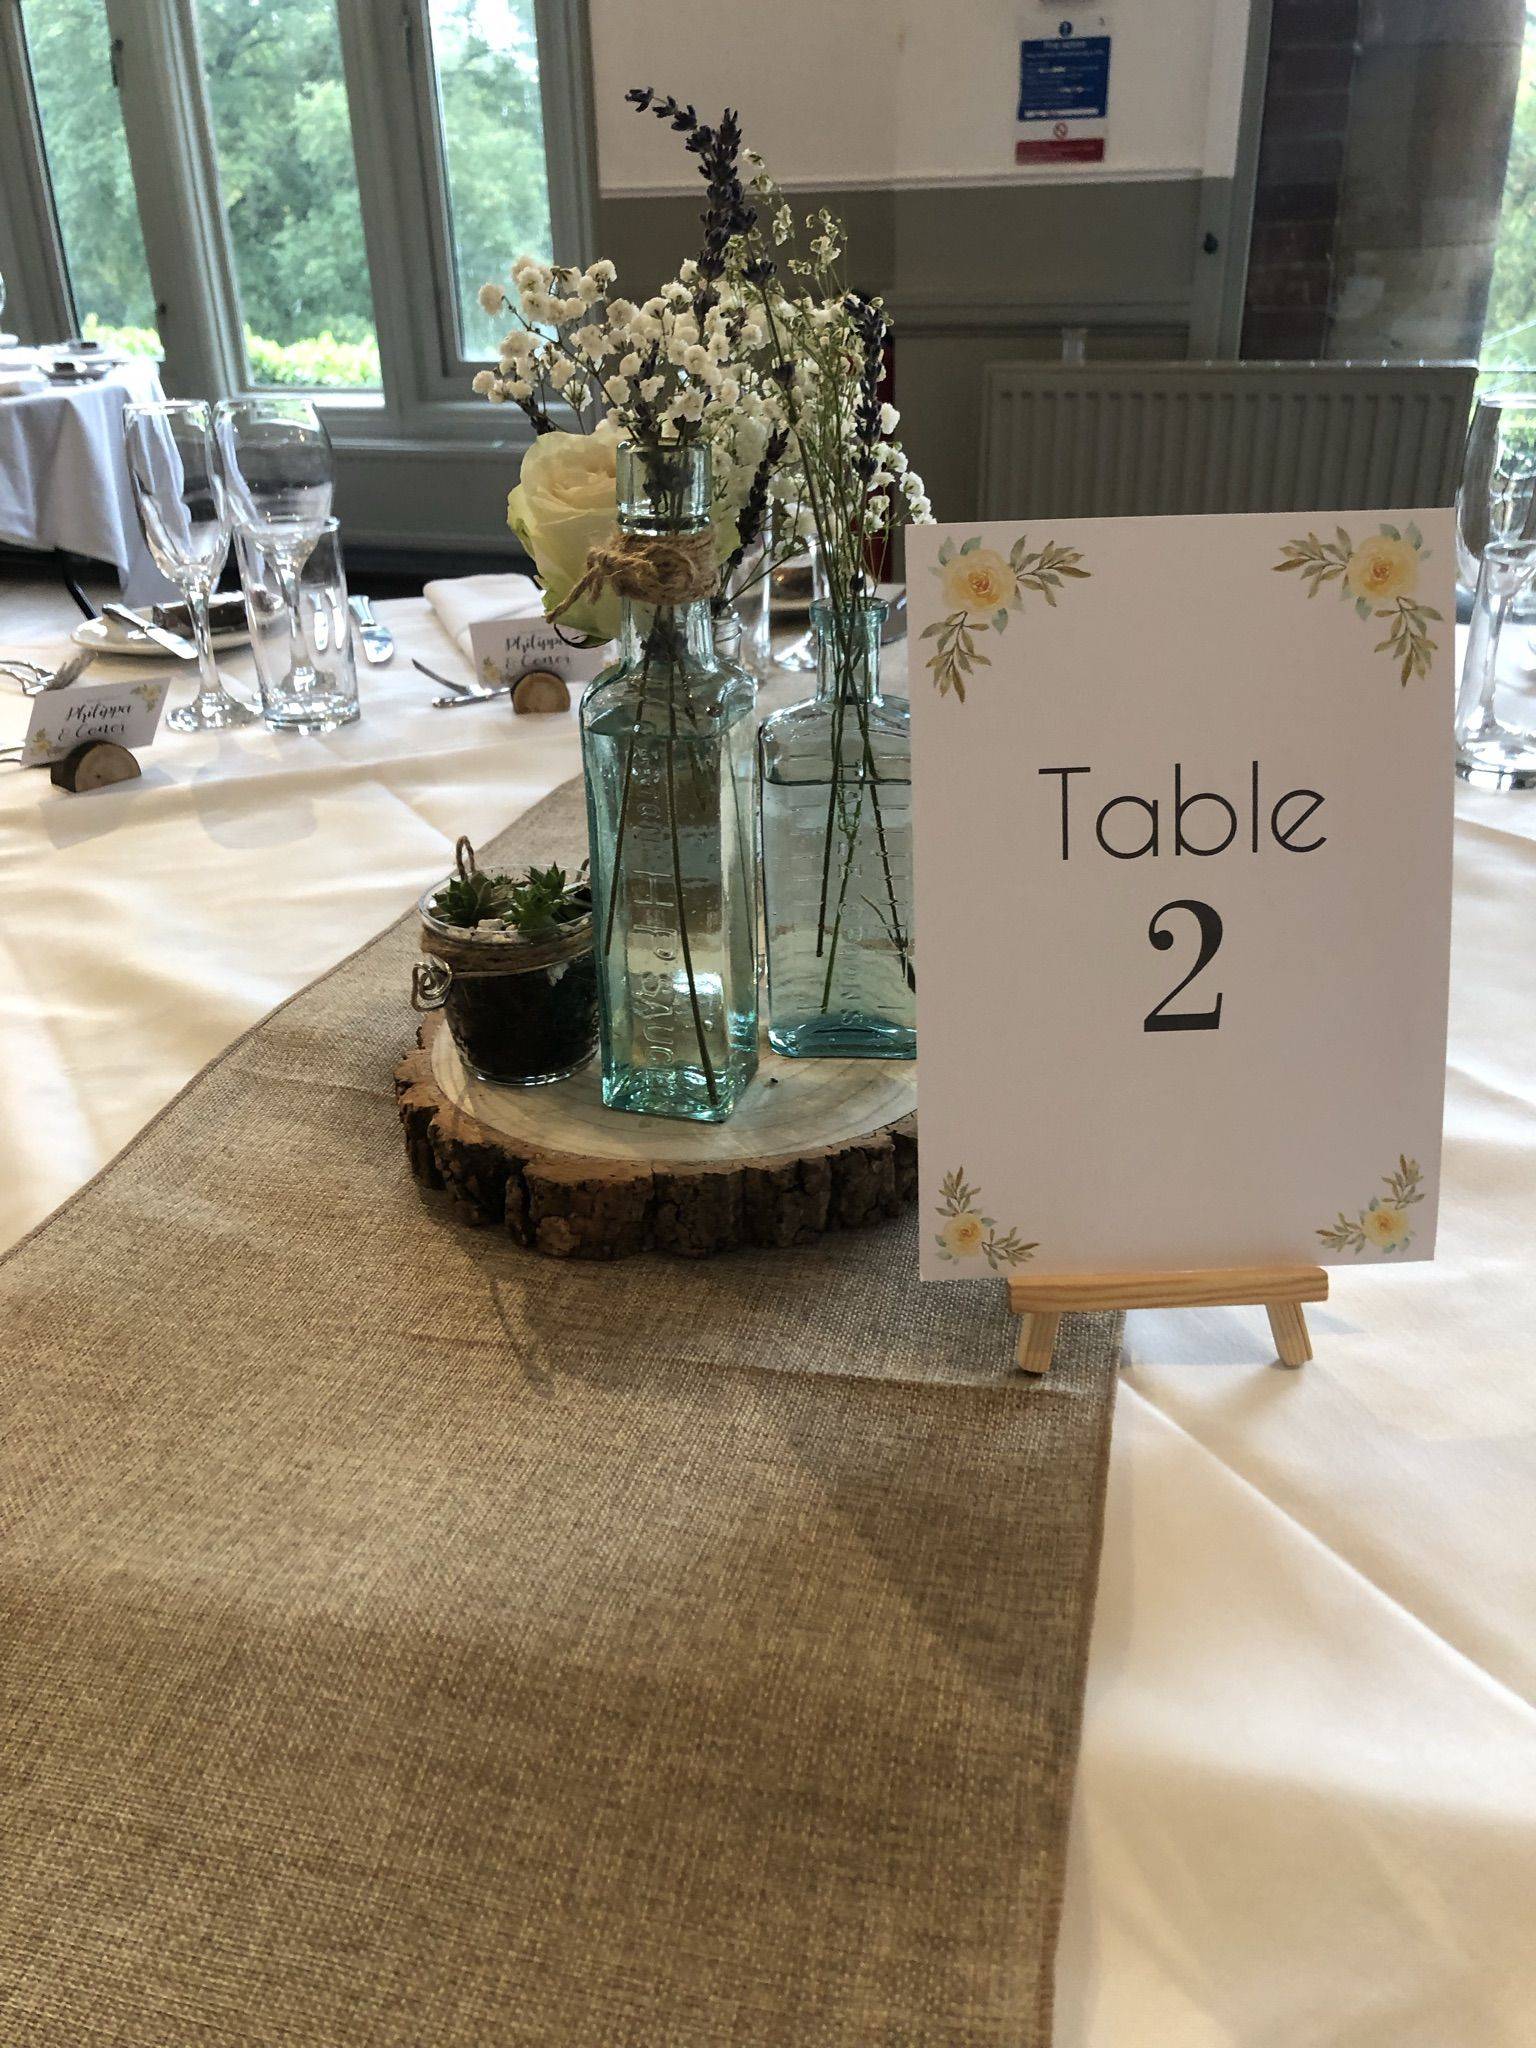 a table with a sign that says table 2.